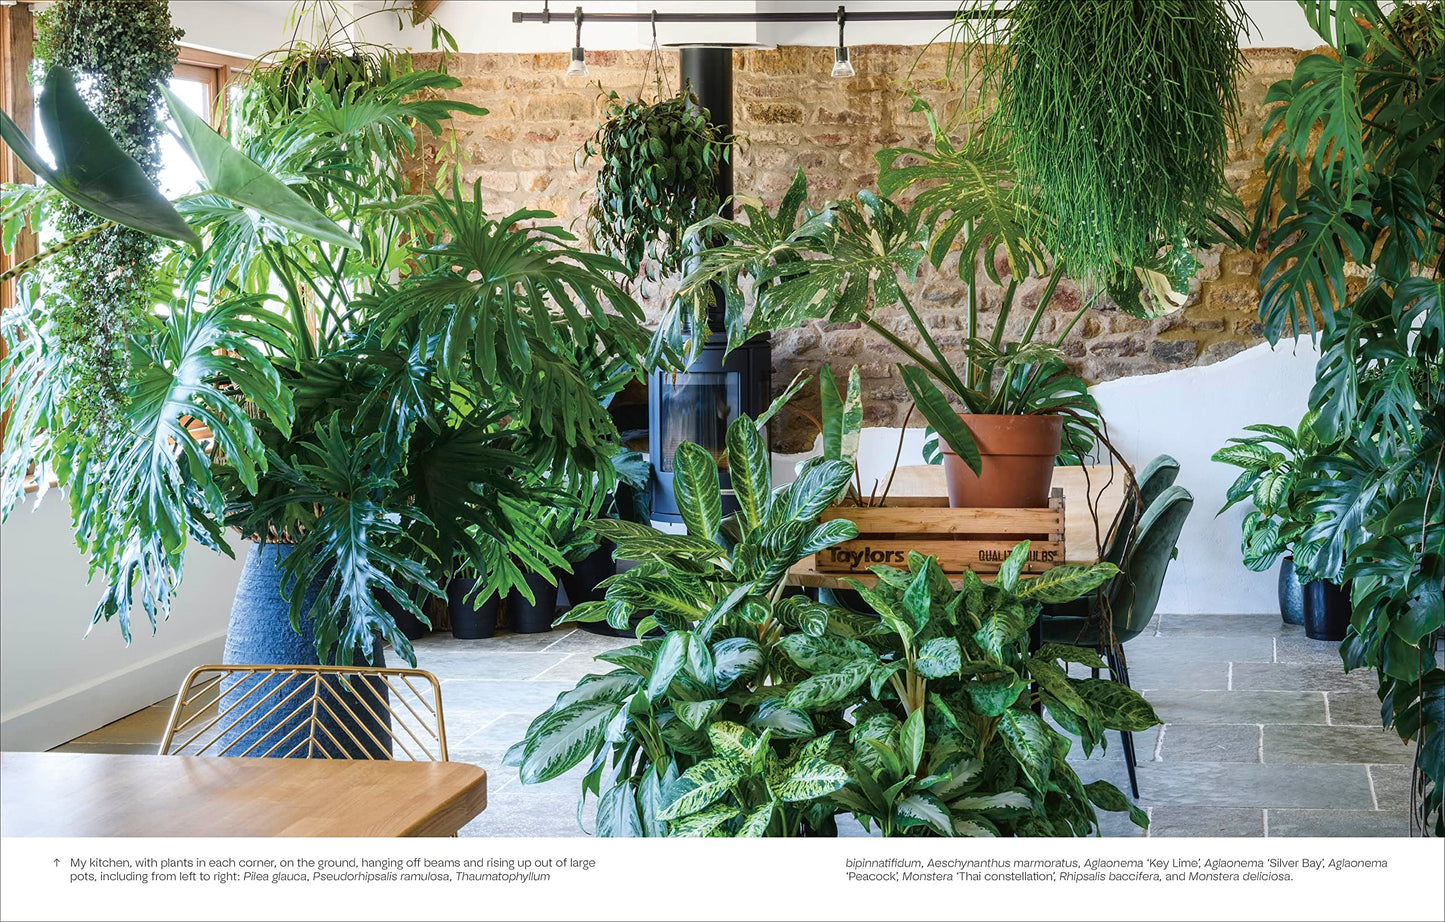 Not Another Jungle: Comprehensive Care for Extraordinary Houseplants